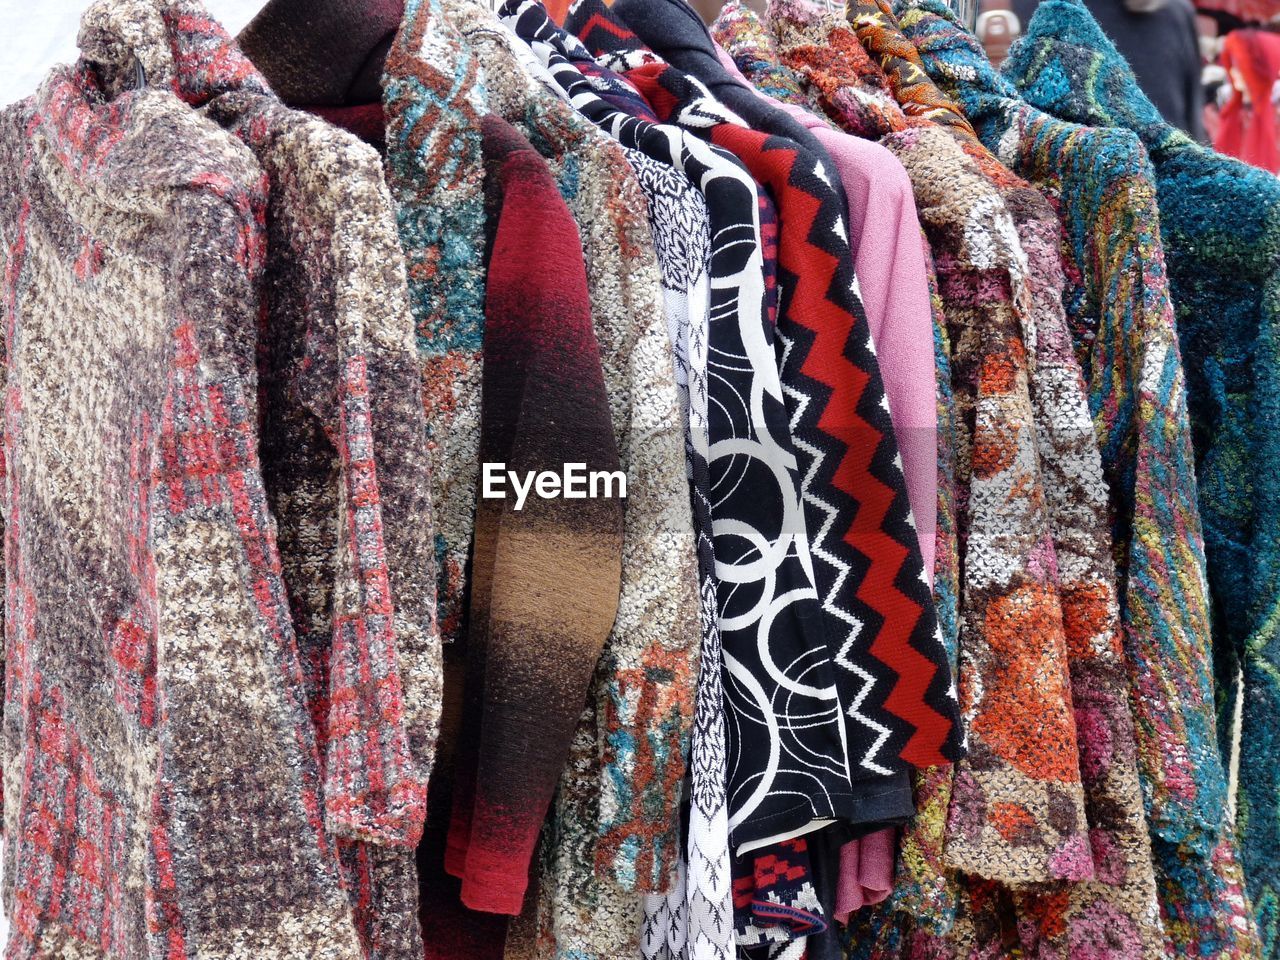 Close-up of clothes hanging on display at store